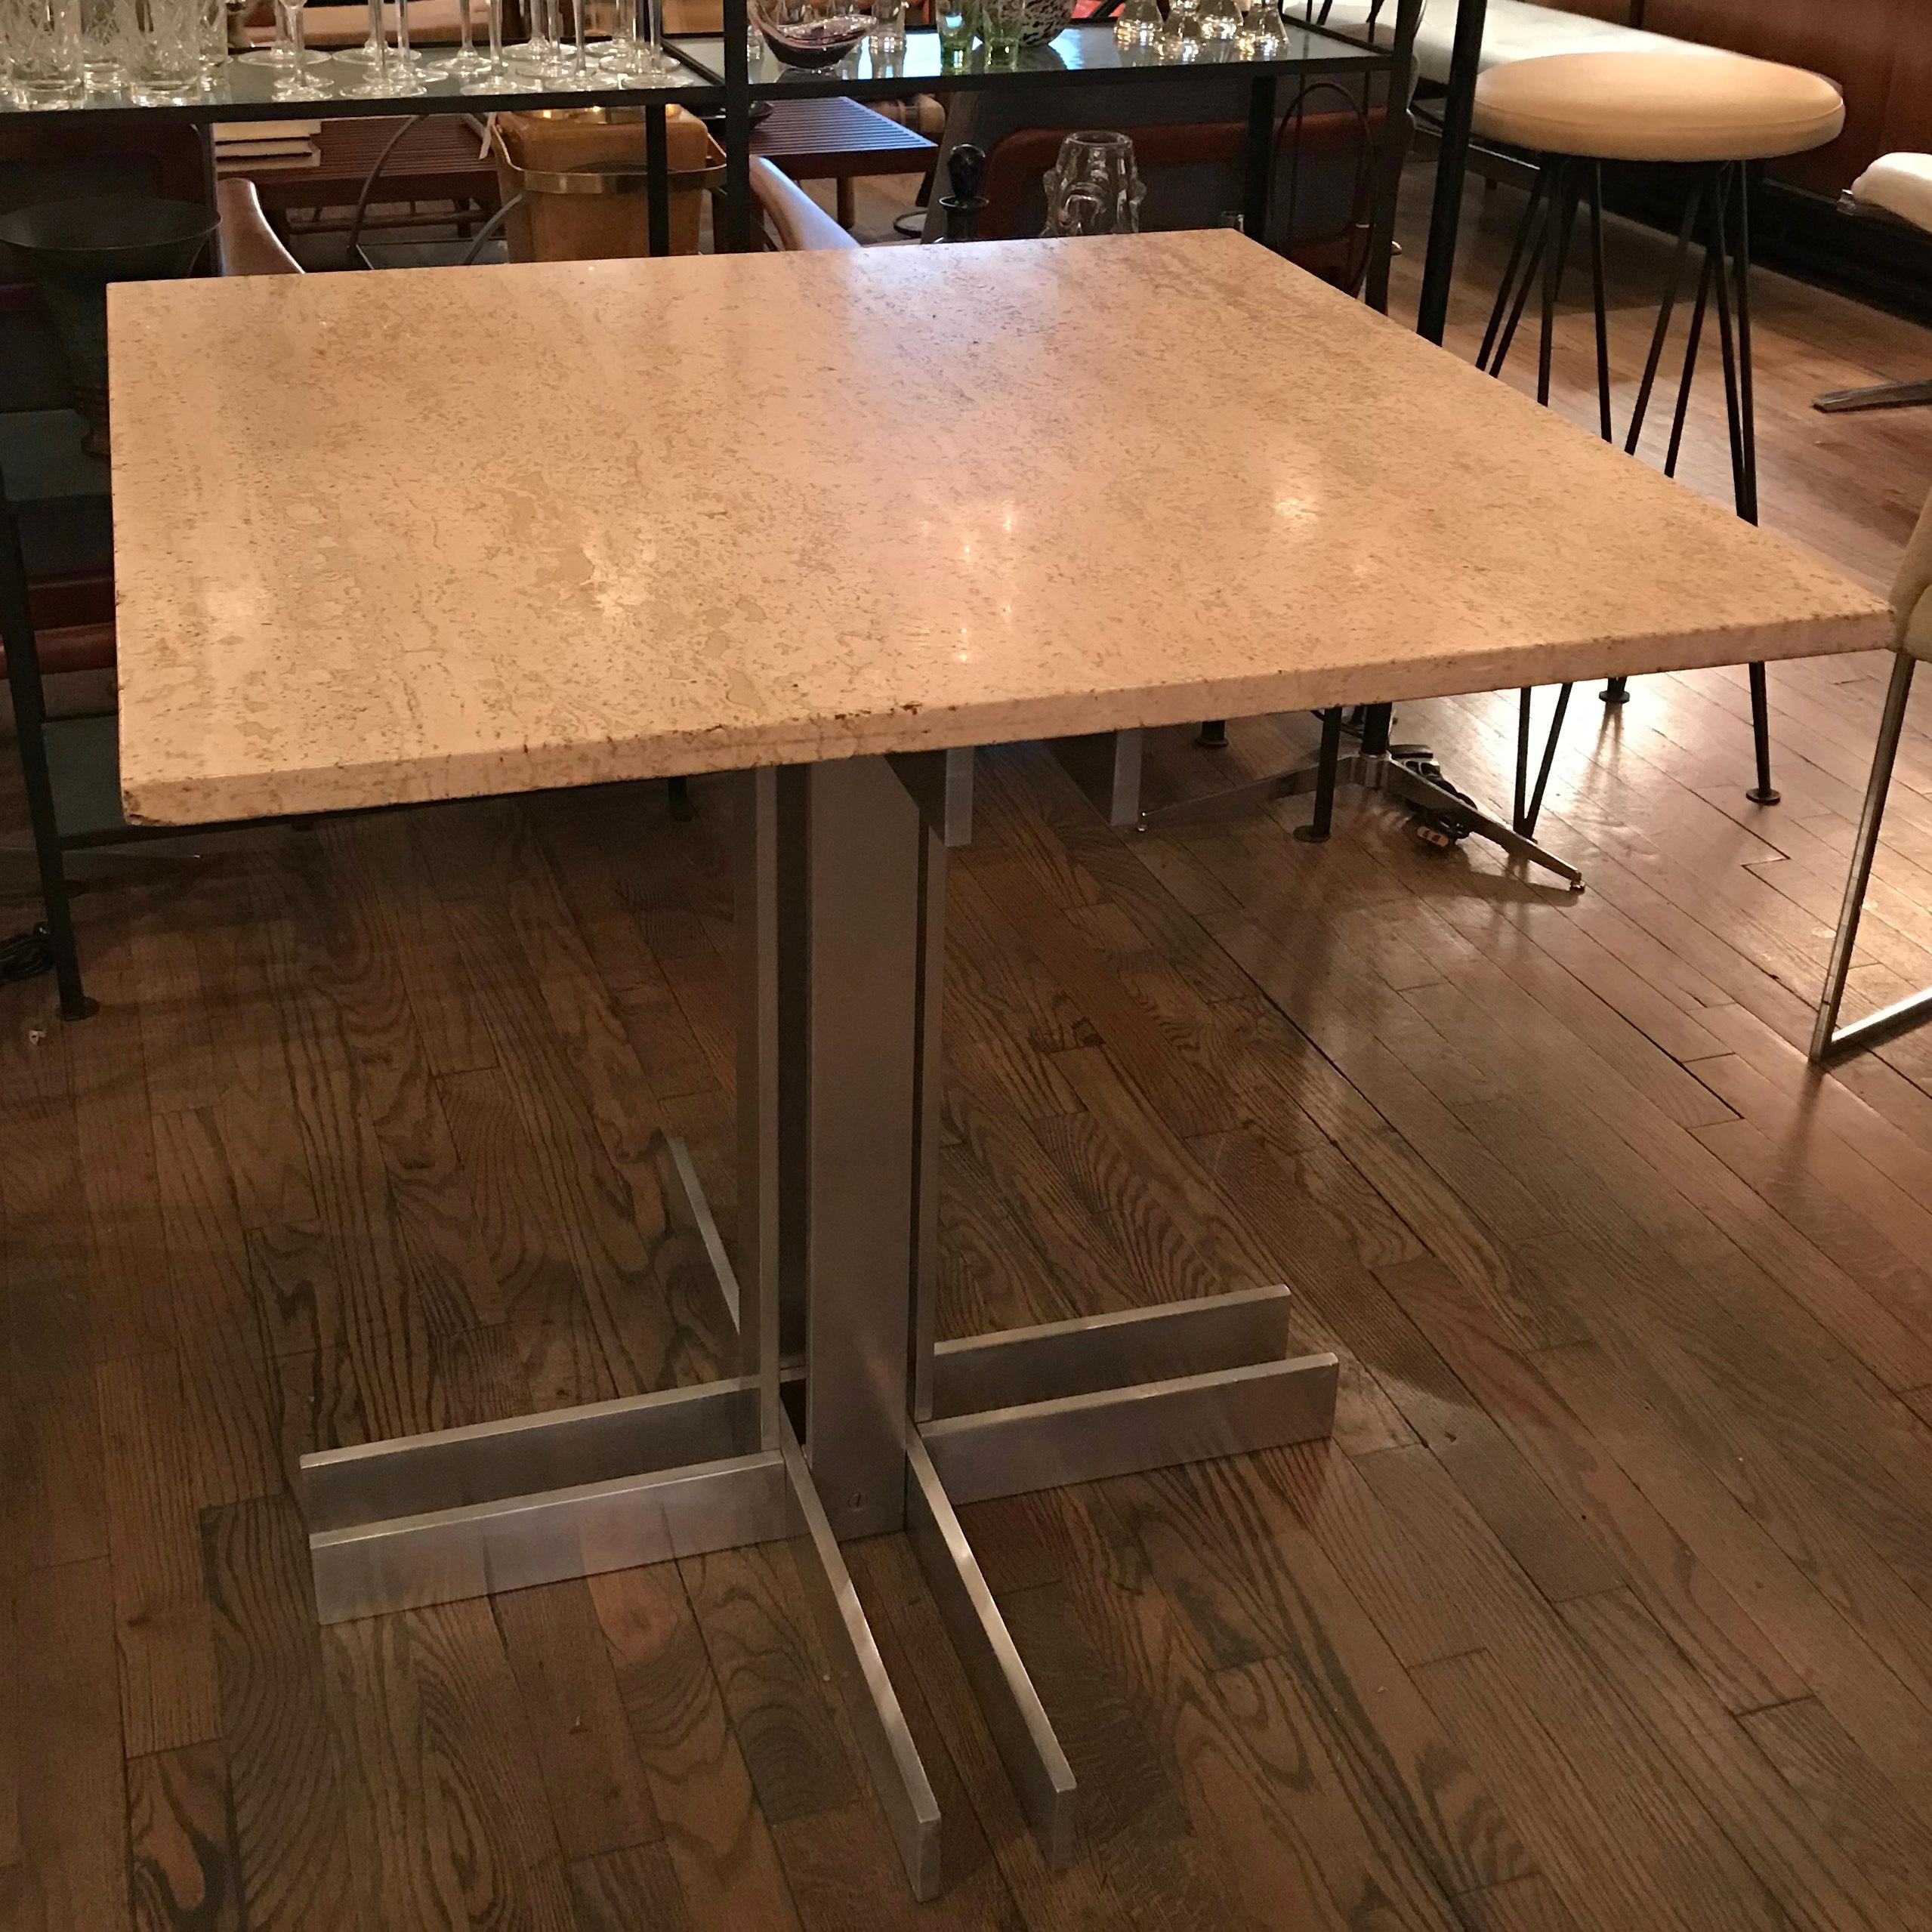 American Postmodern Travertine Table with Architectural Aluminum Base